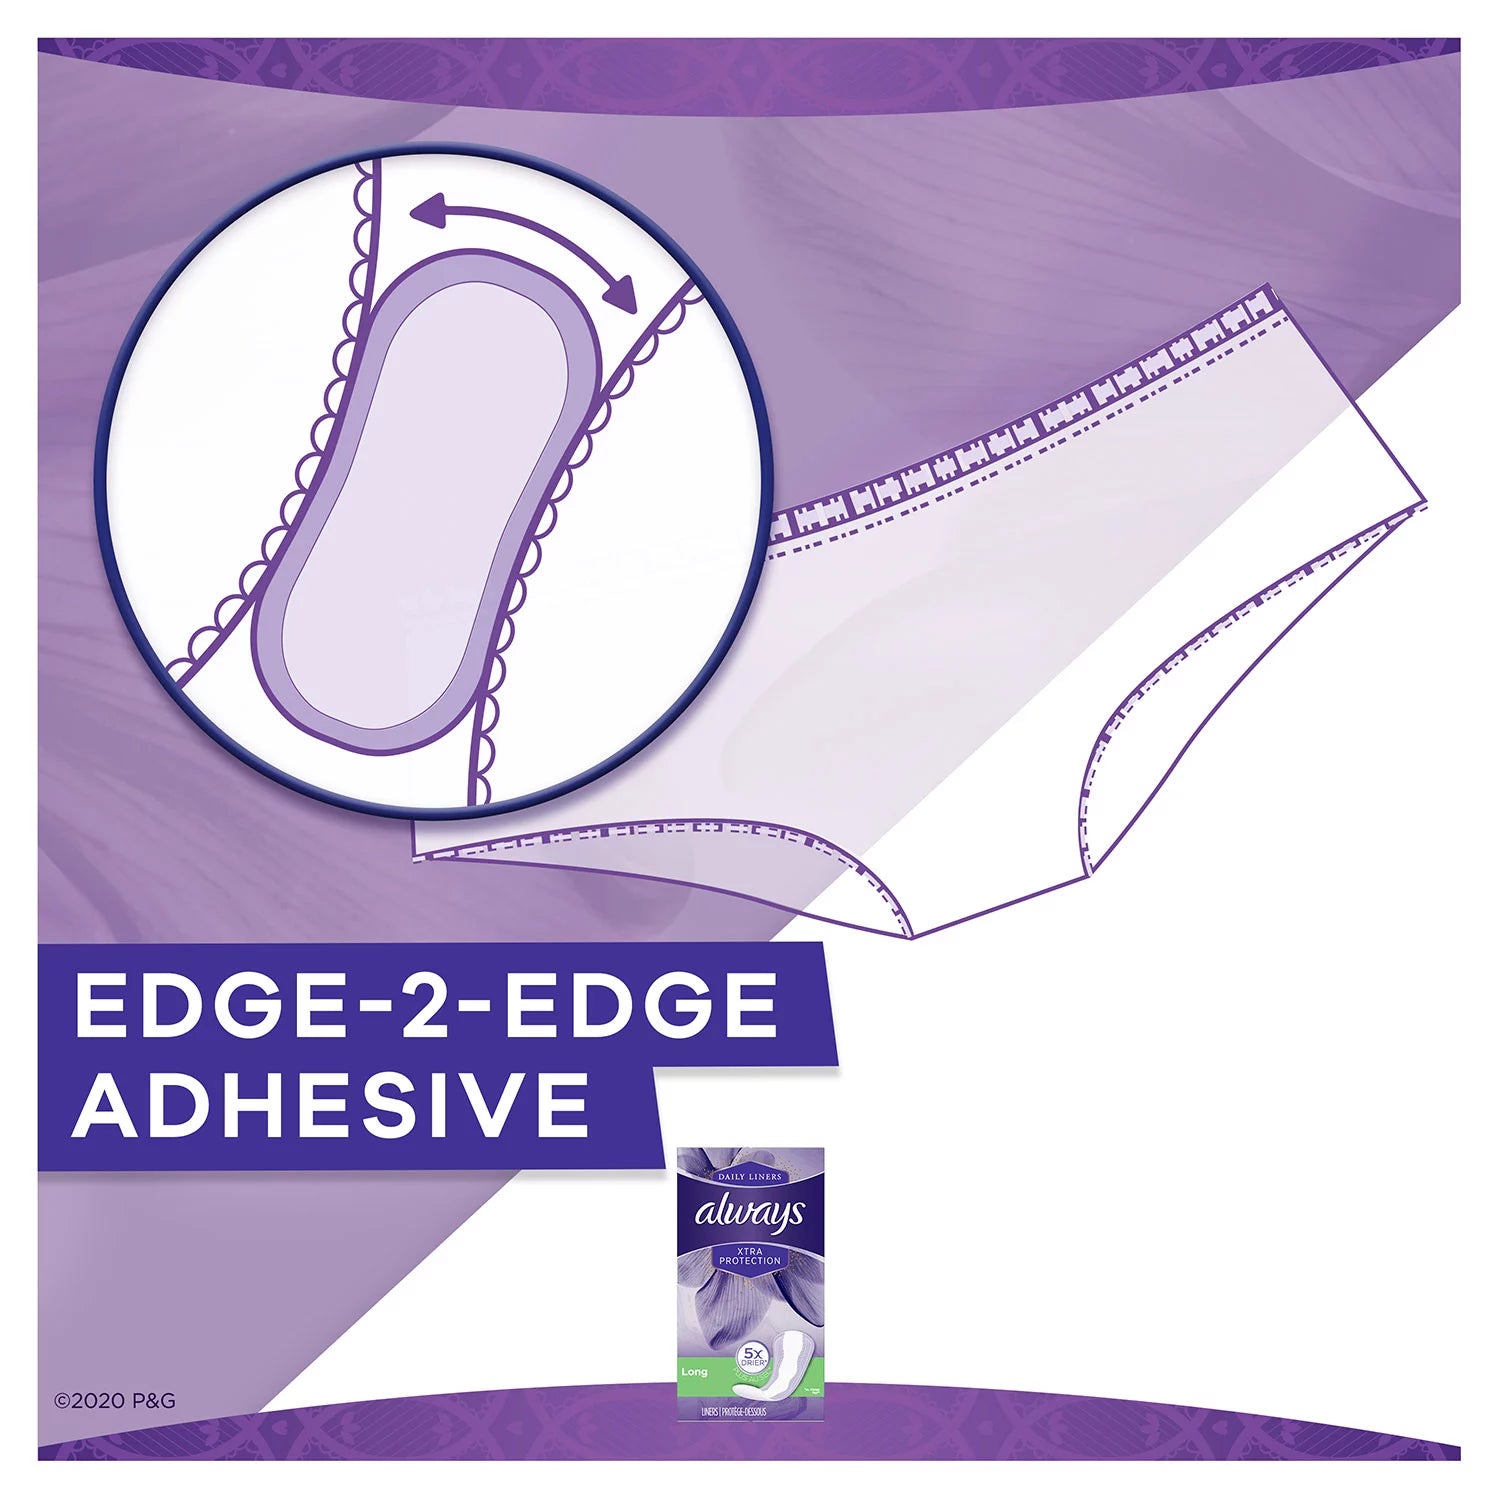 Always Xtra Protection Long & Regular & Thin Unscented Pads